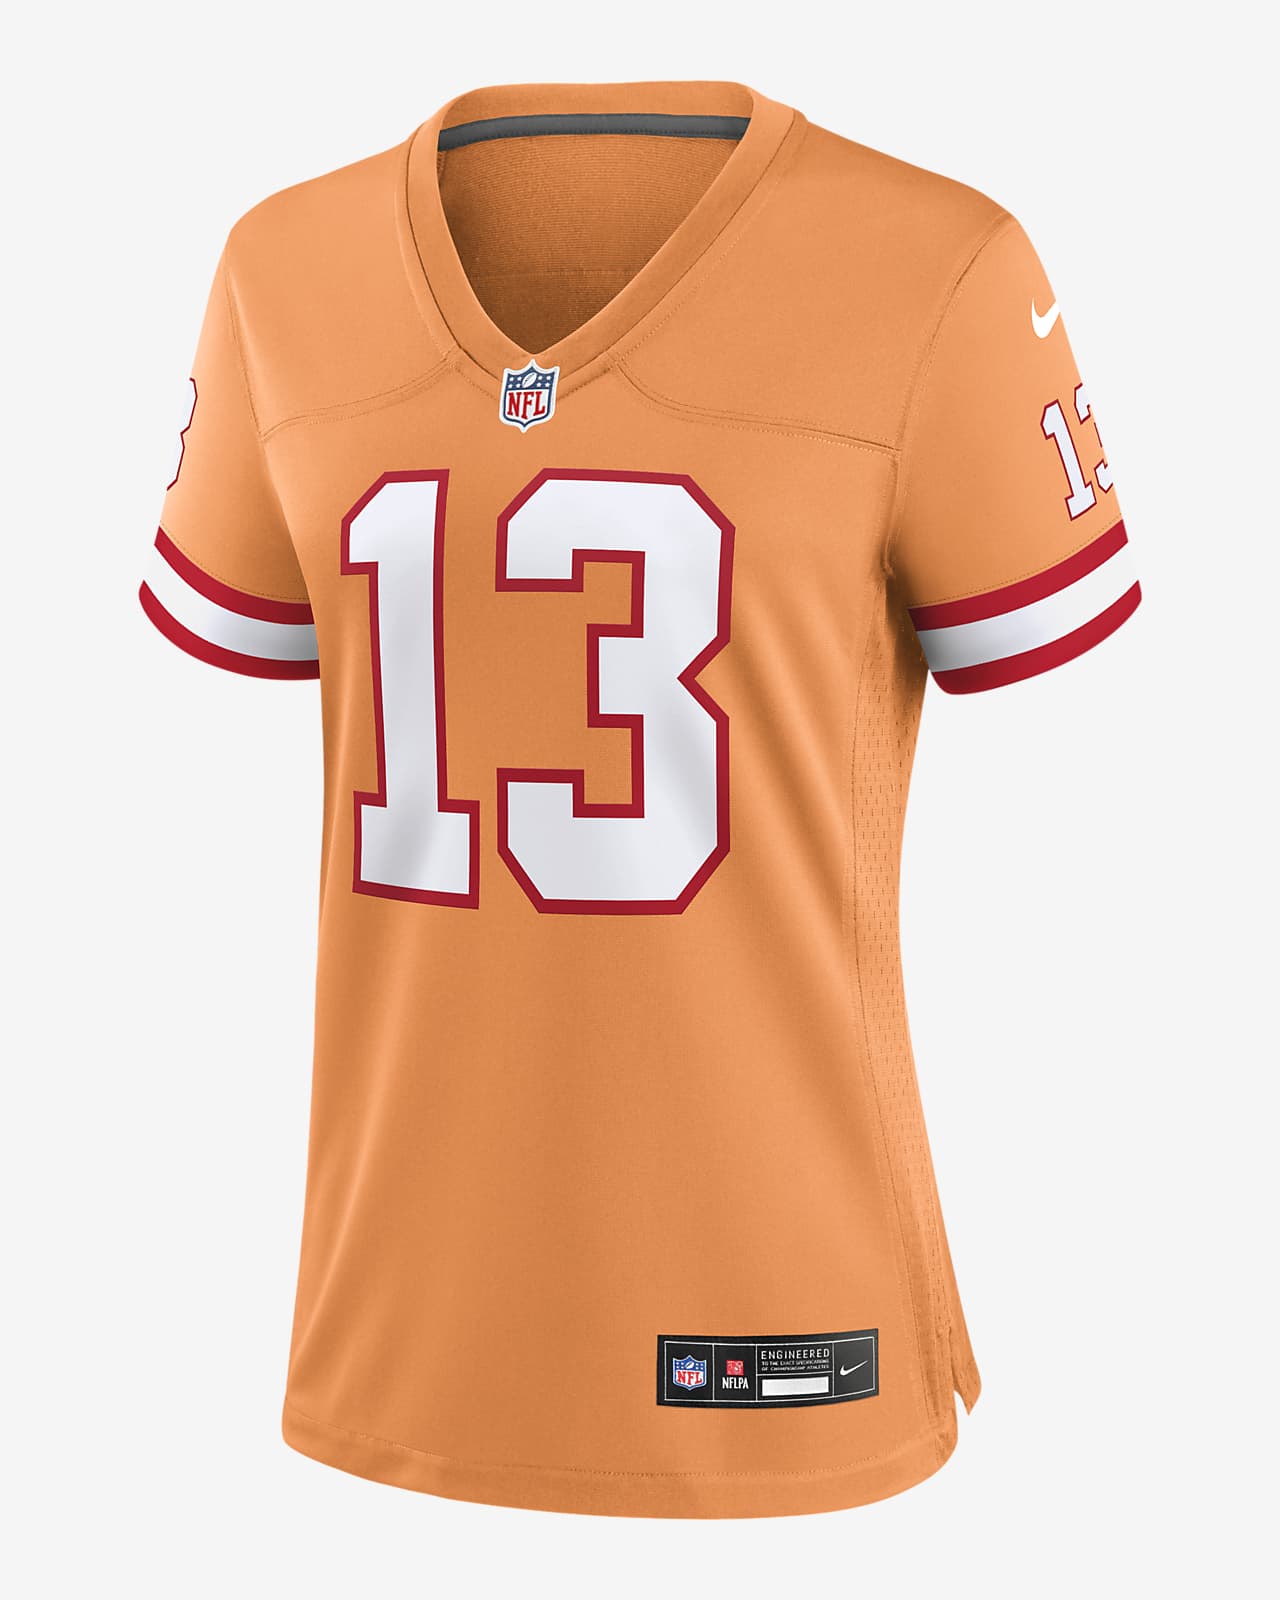 Mike Evans Tampa Bay Buccaneers Nike Women's NFL Game Football Jersey in Orange, Size: Small | 67NW01OS8BF-PY0